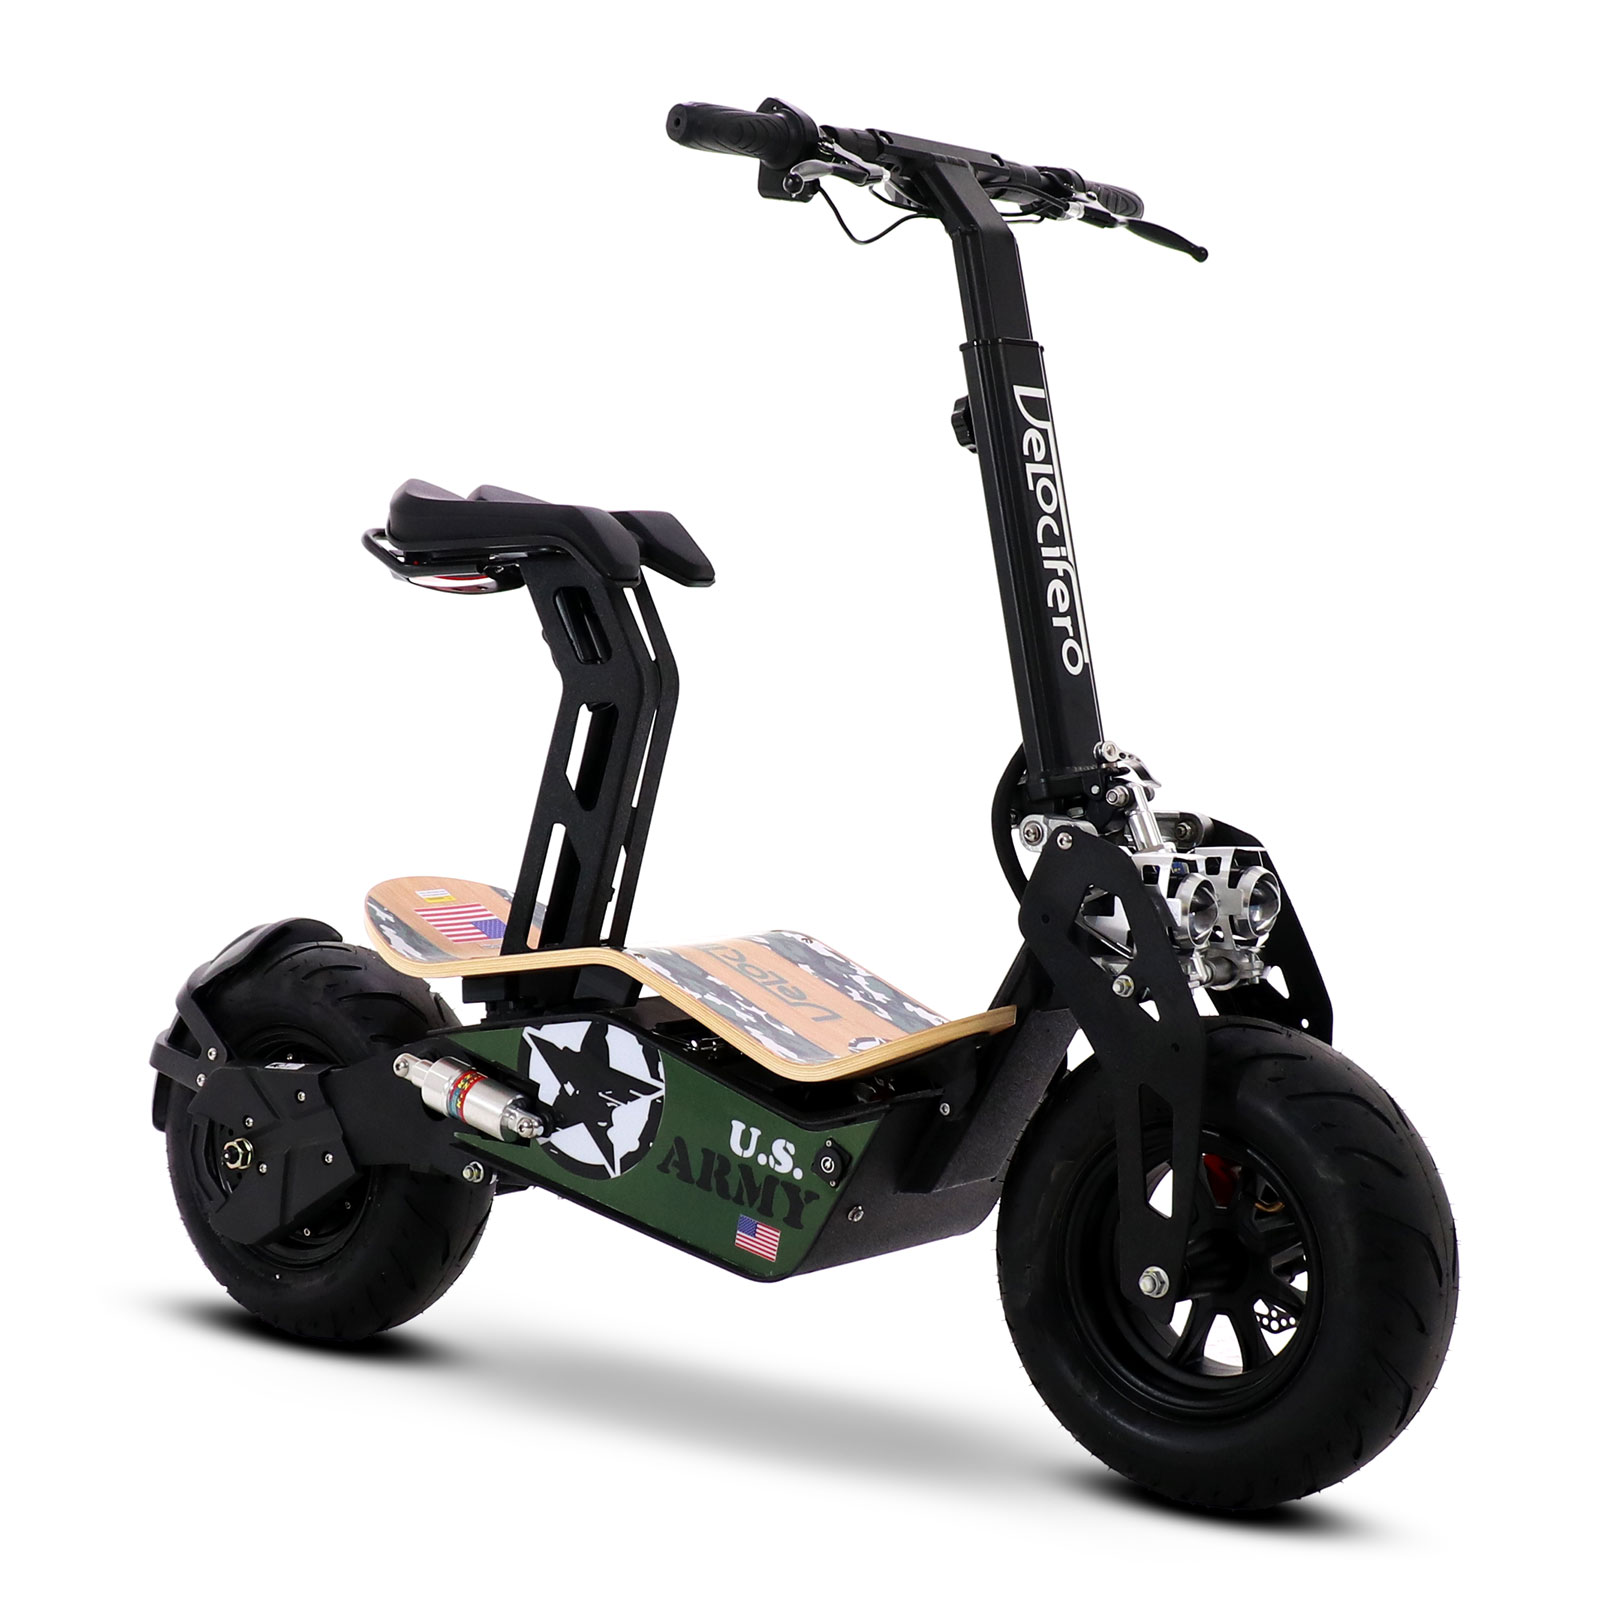 Velocifero MAD Lithium 48v 1600W US Army Adult Electric Scooter